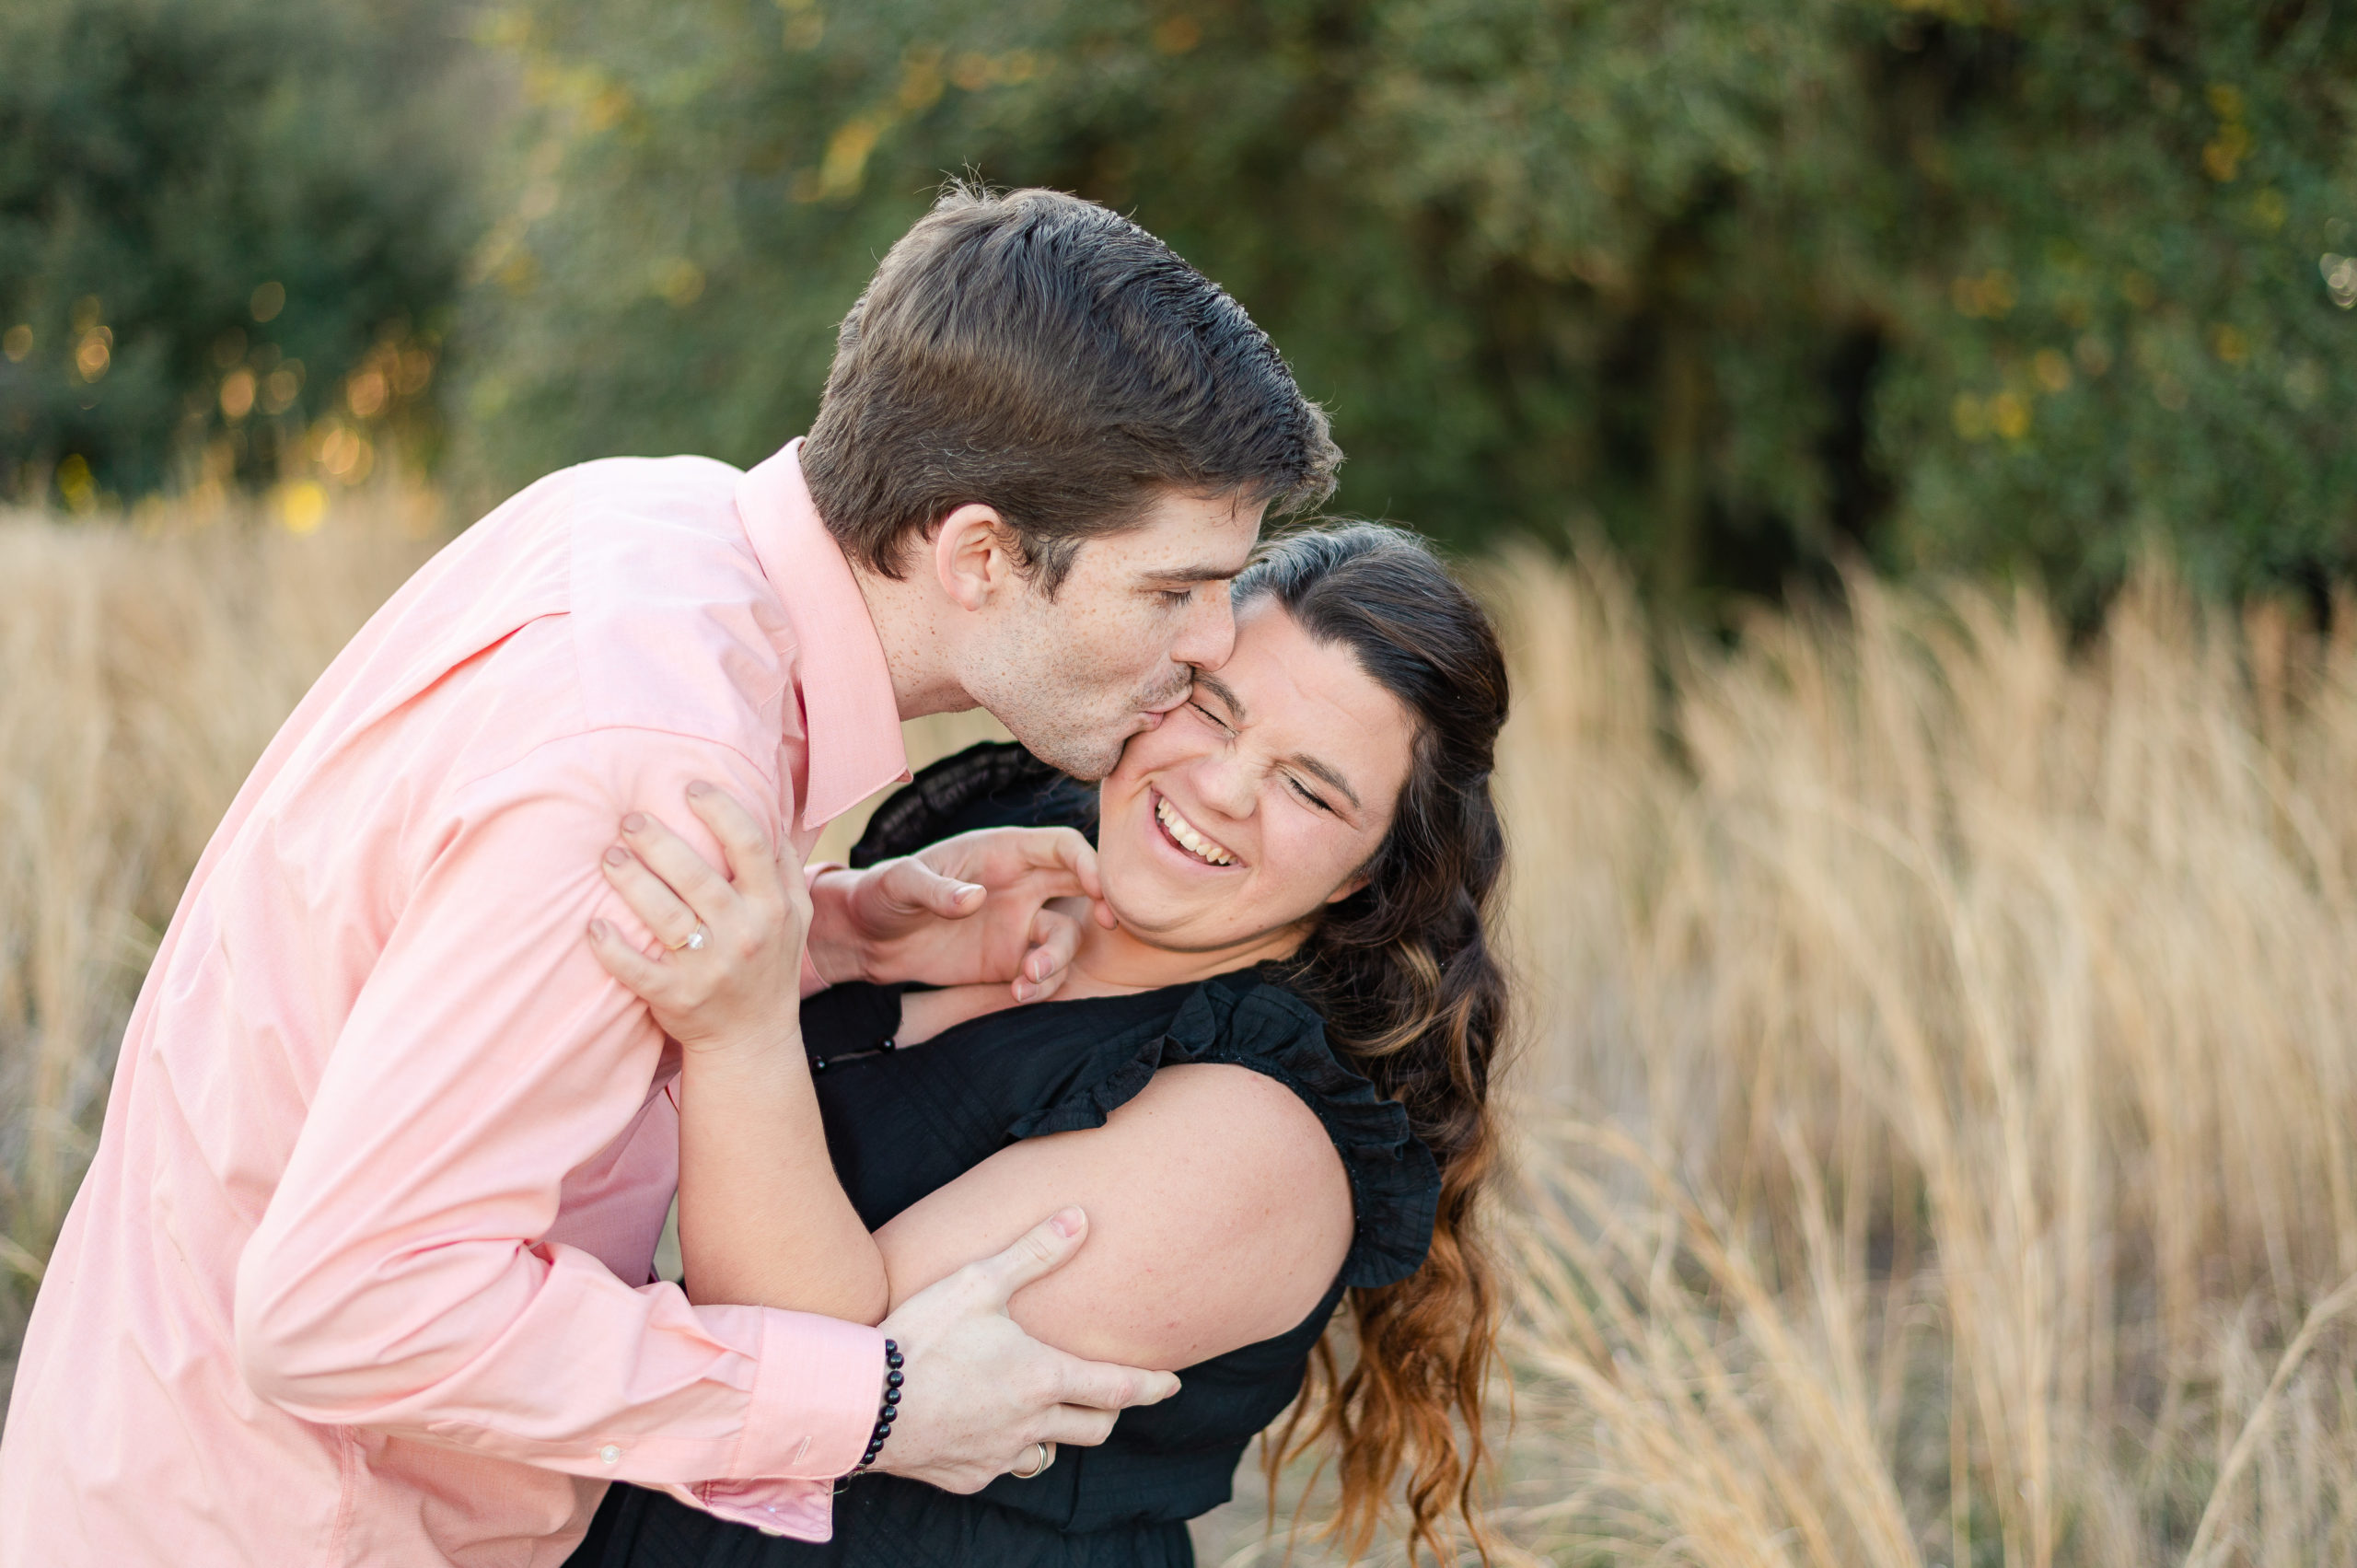 Engagement photo of a man pulling a woman close and kissing her on the temple while she is giggling